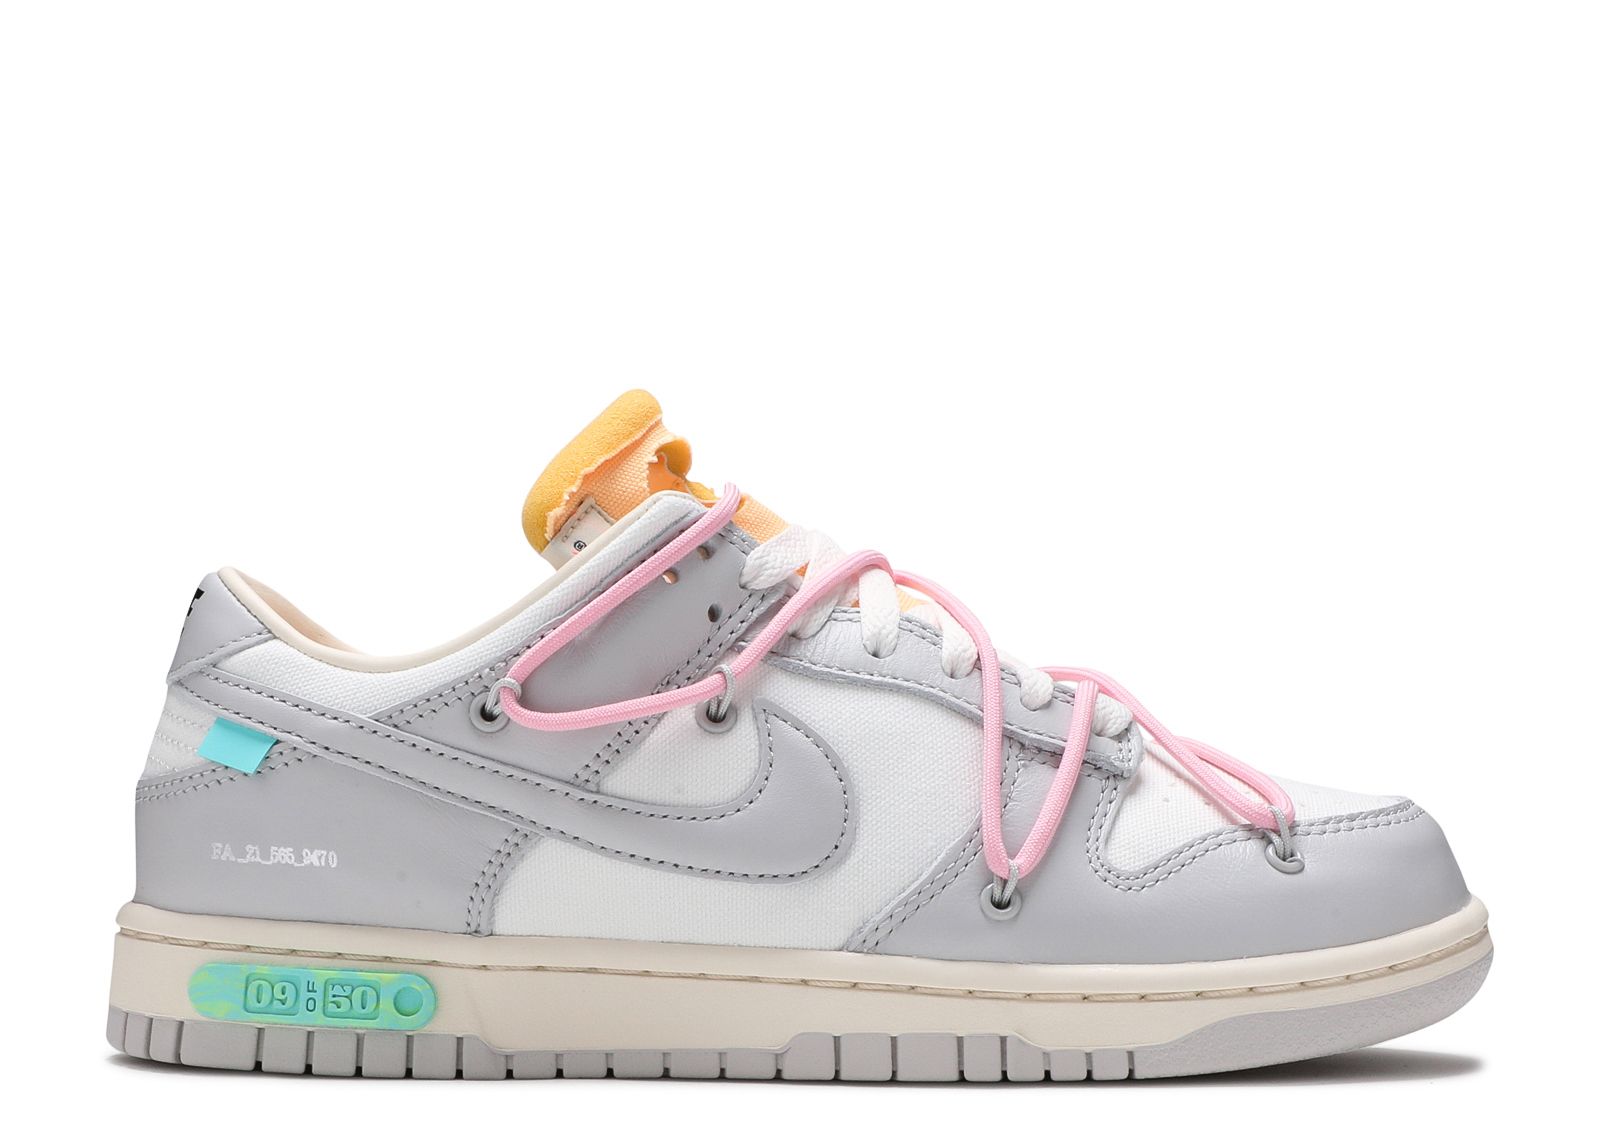 Кроссовки Nike Off-White X Dunk Low 'Lot 09 Of 50', белый